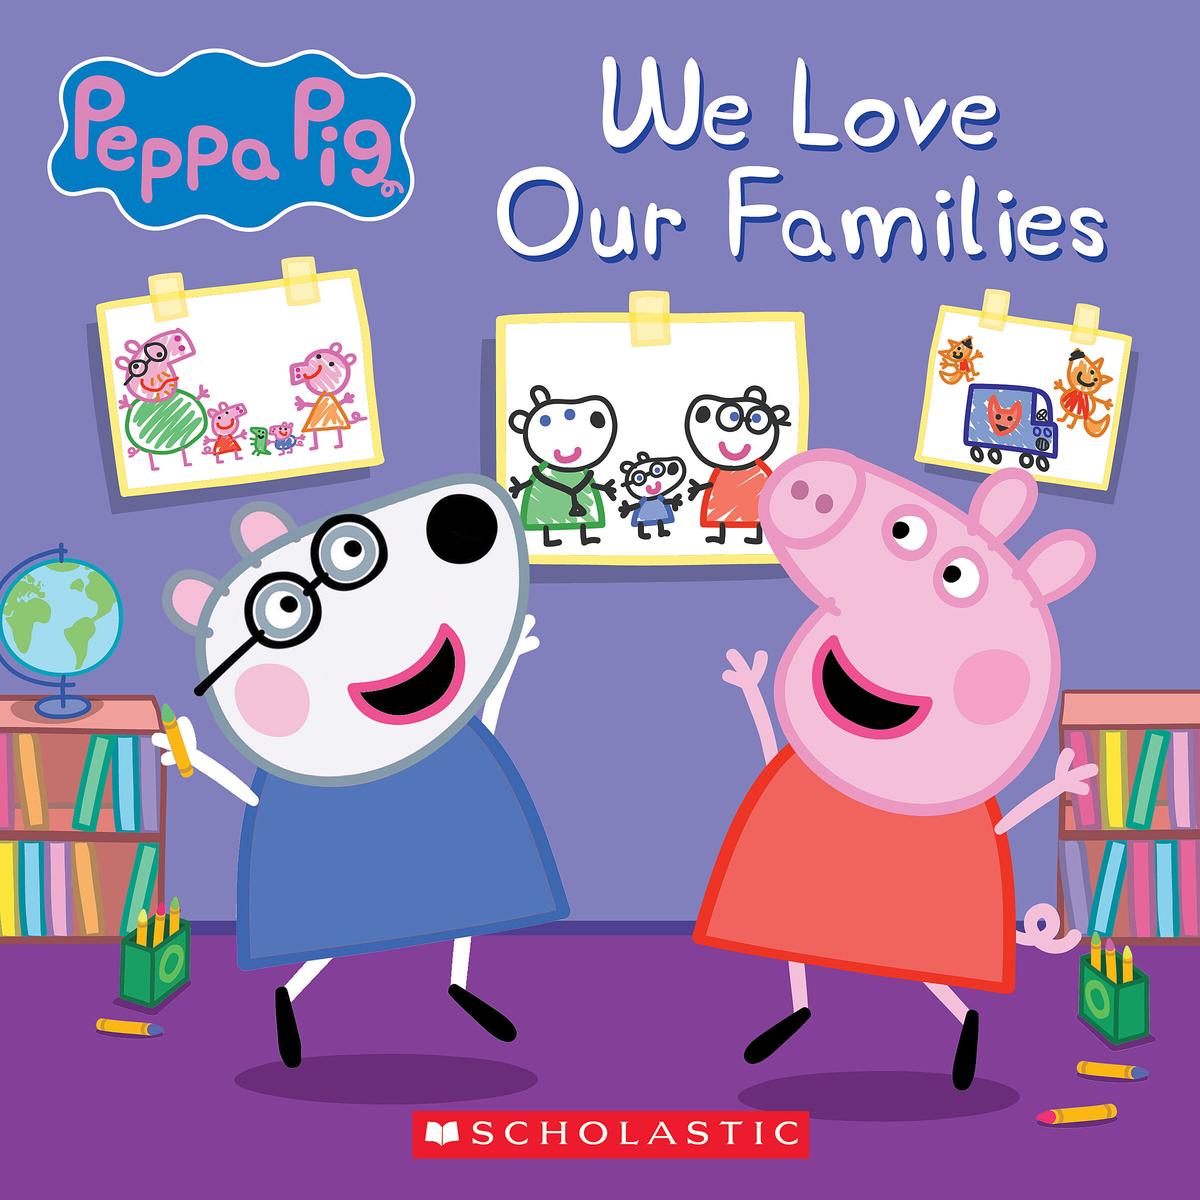 We Love Our Families (Peppa Pig) - 